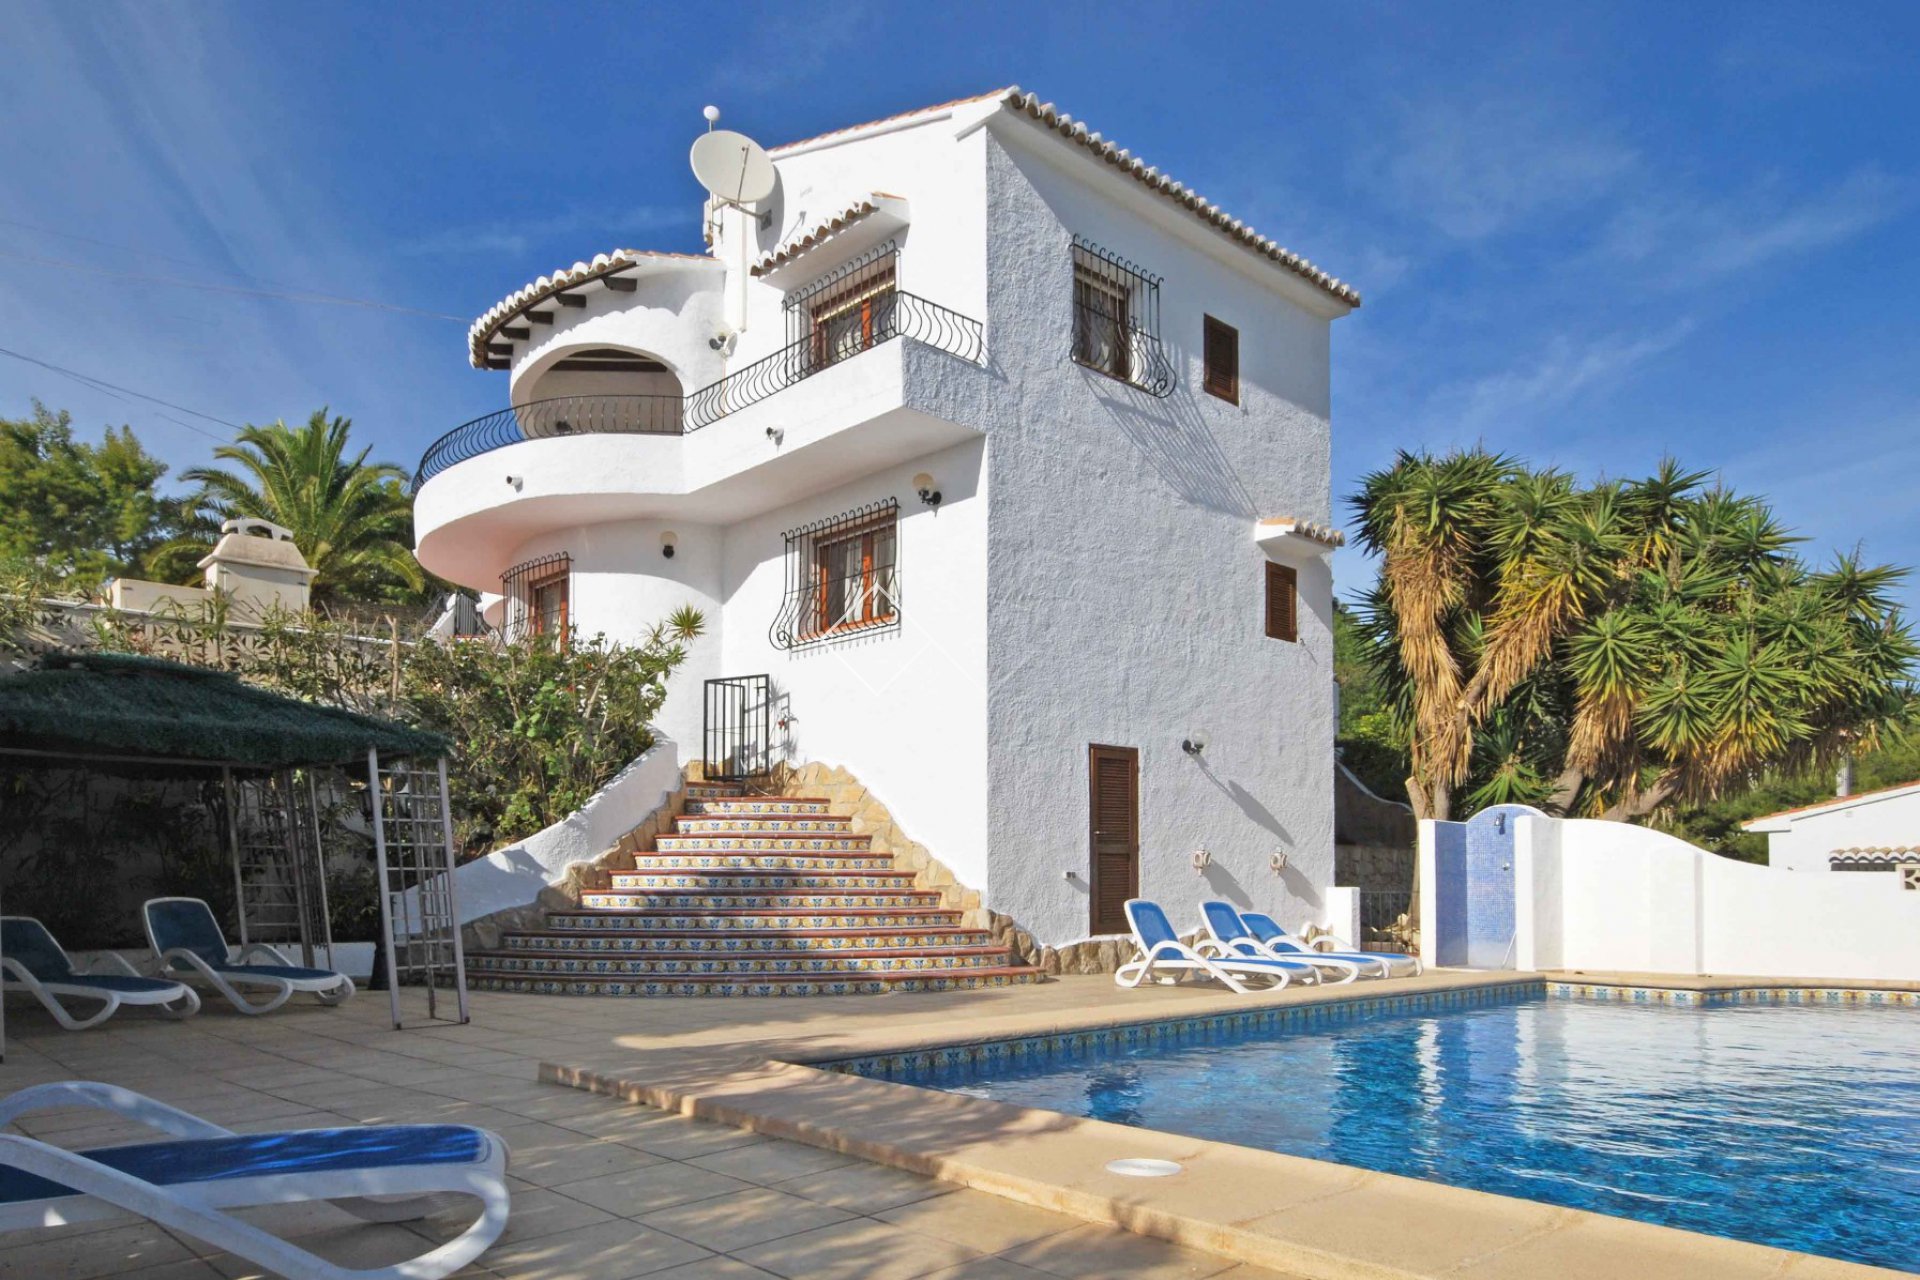 Large villa with pool - Detached villa with sea views in Benitachell